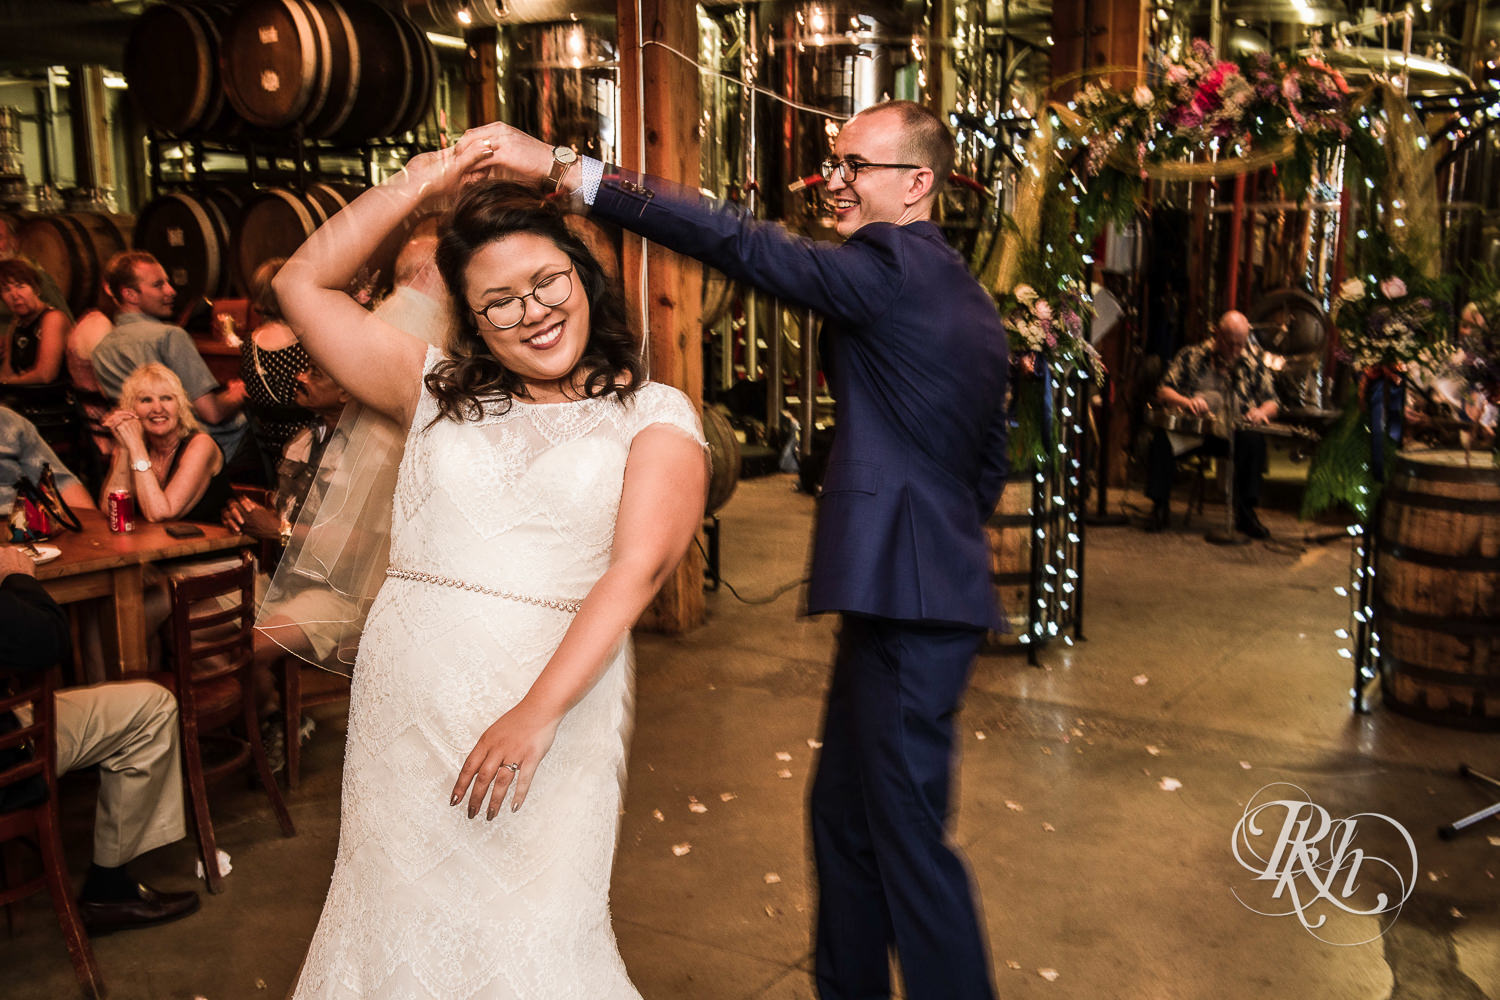 Bride and groom dance during brewery wedding reception at 612 Brew in Minneapolis, Minnesota.